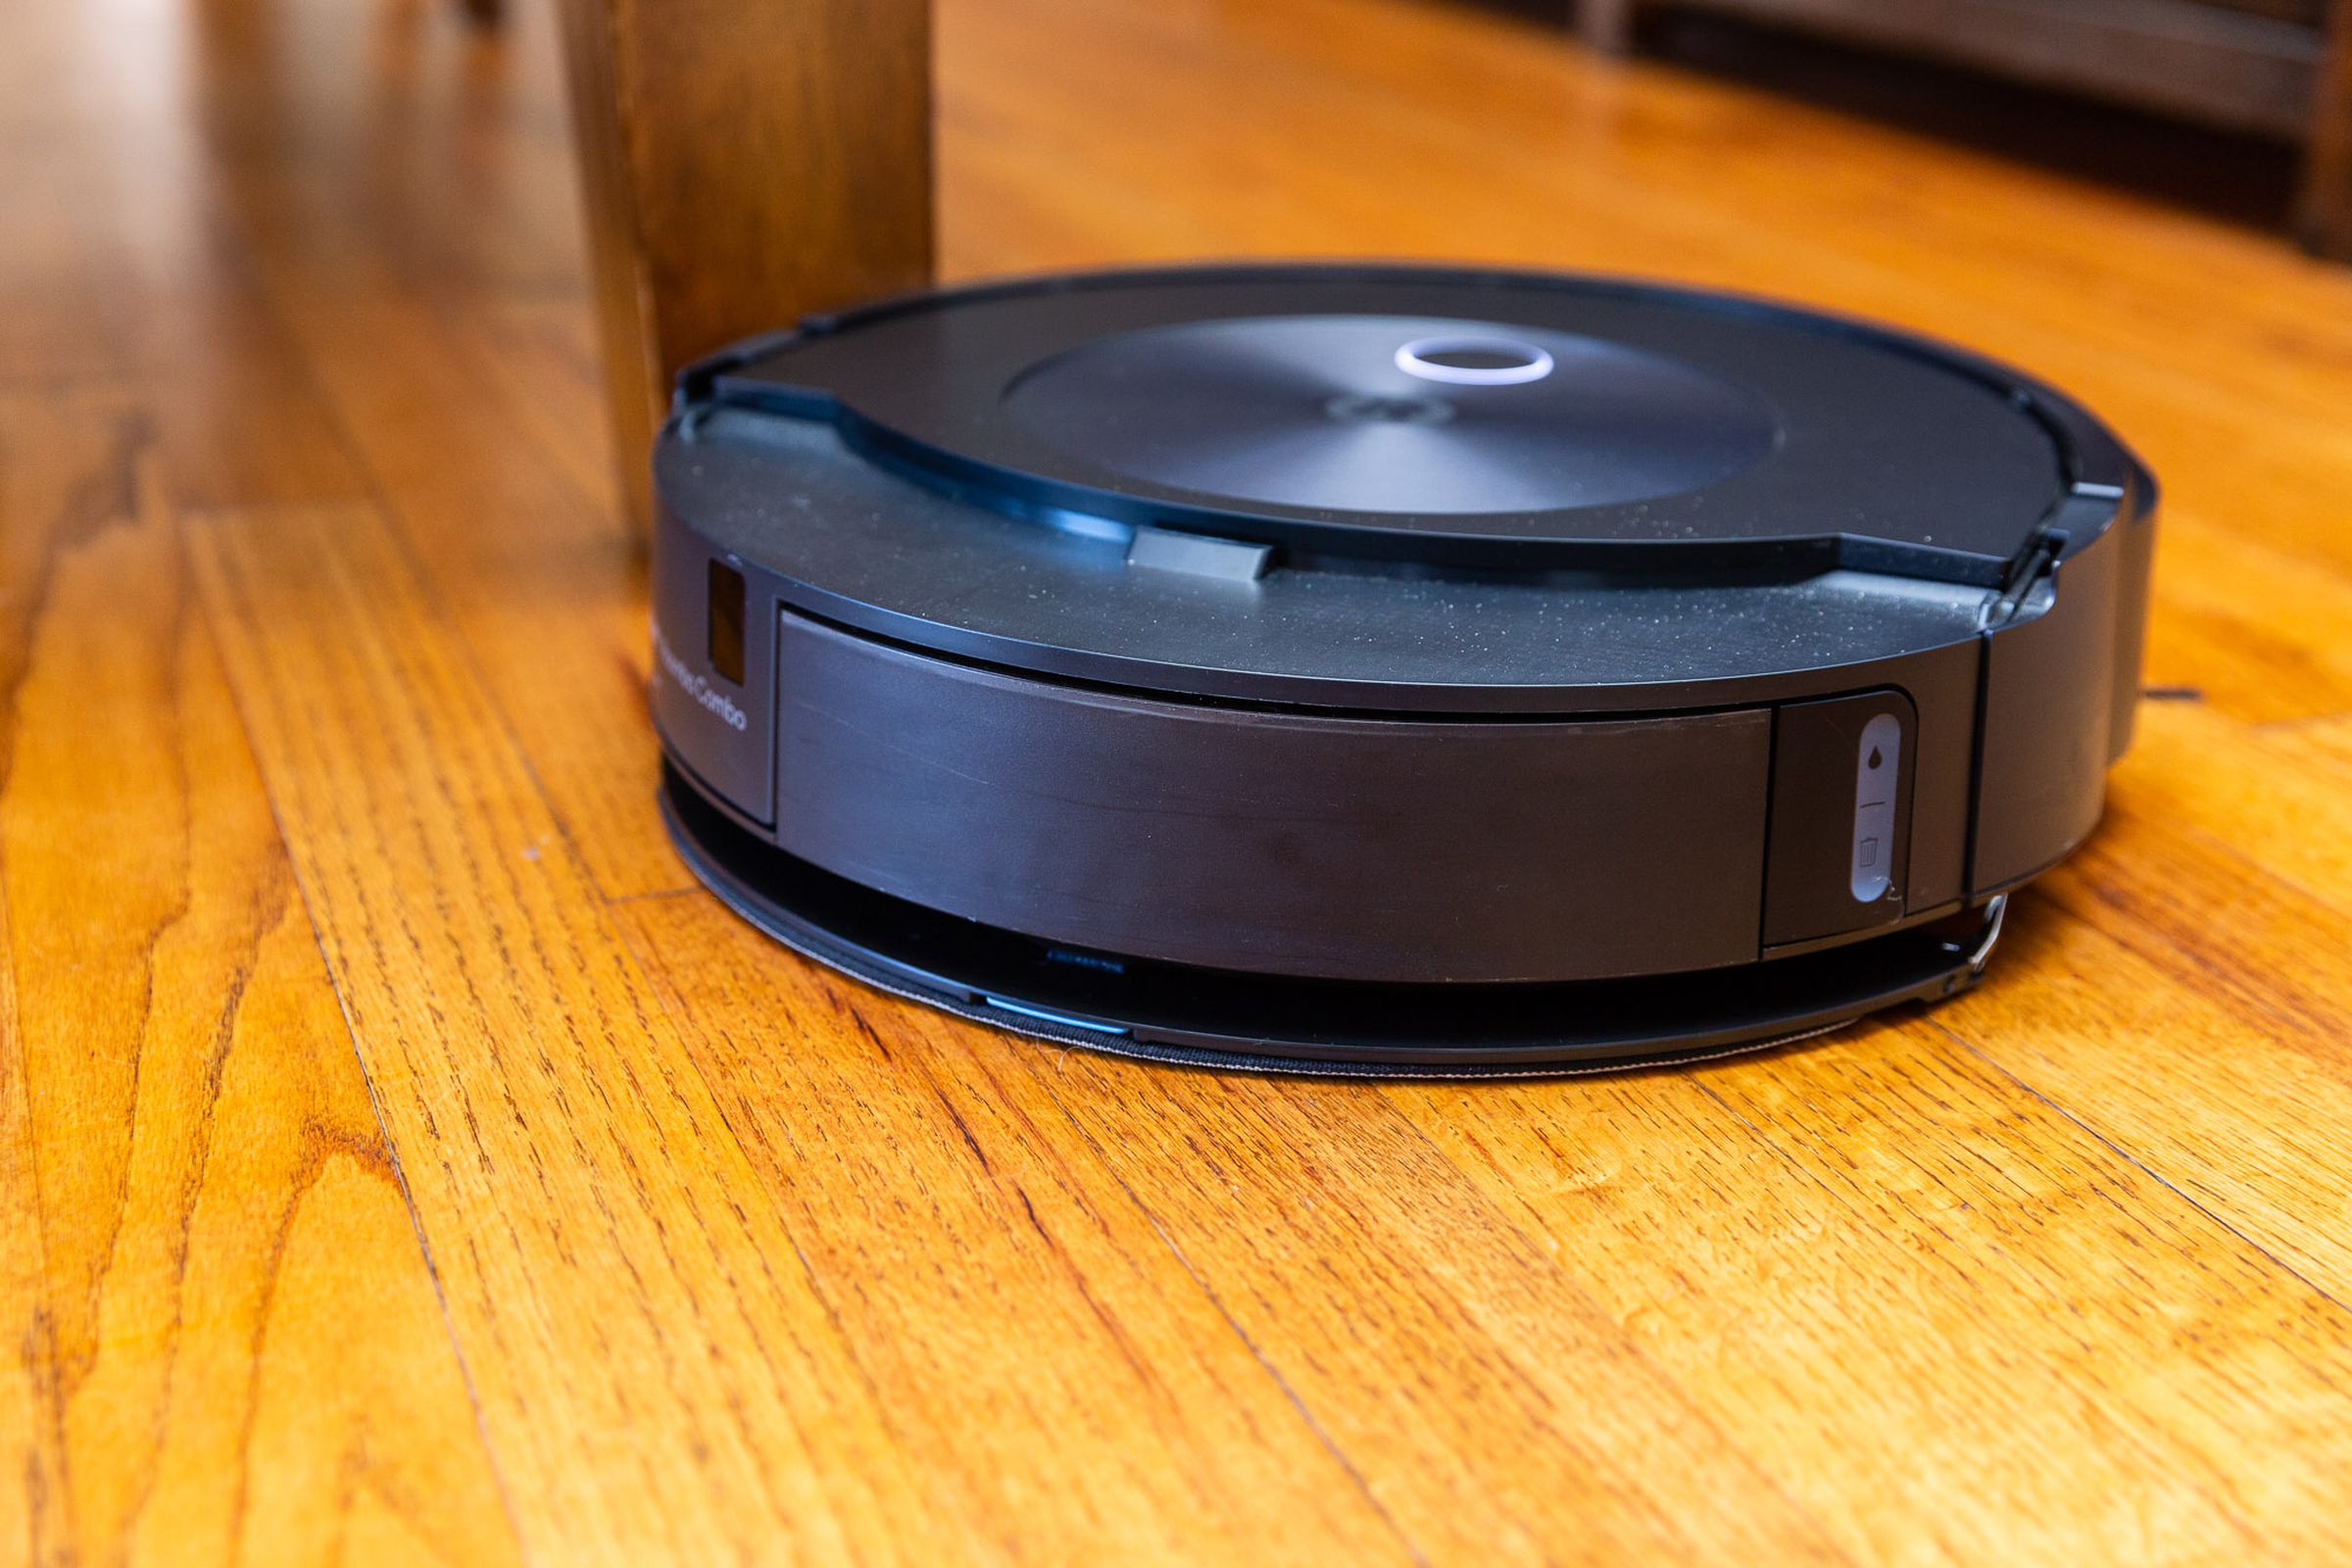 A robot vacuum with mopping arm deployed. The arm is a circular section of the top case of the Roomba with a mop pad on the underside. It presses against the floor when in use.